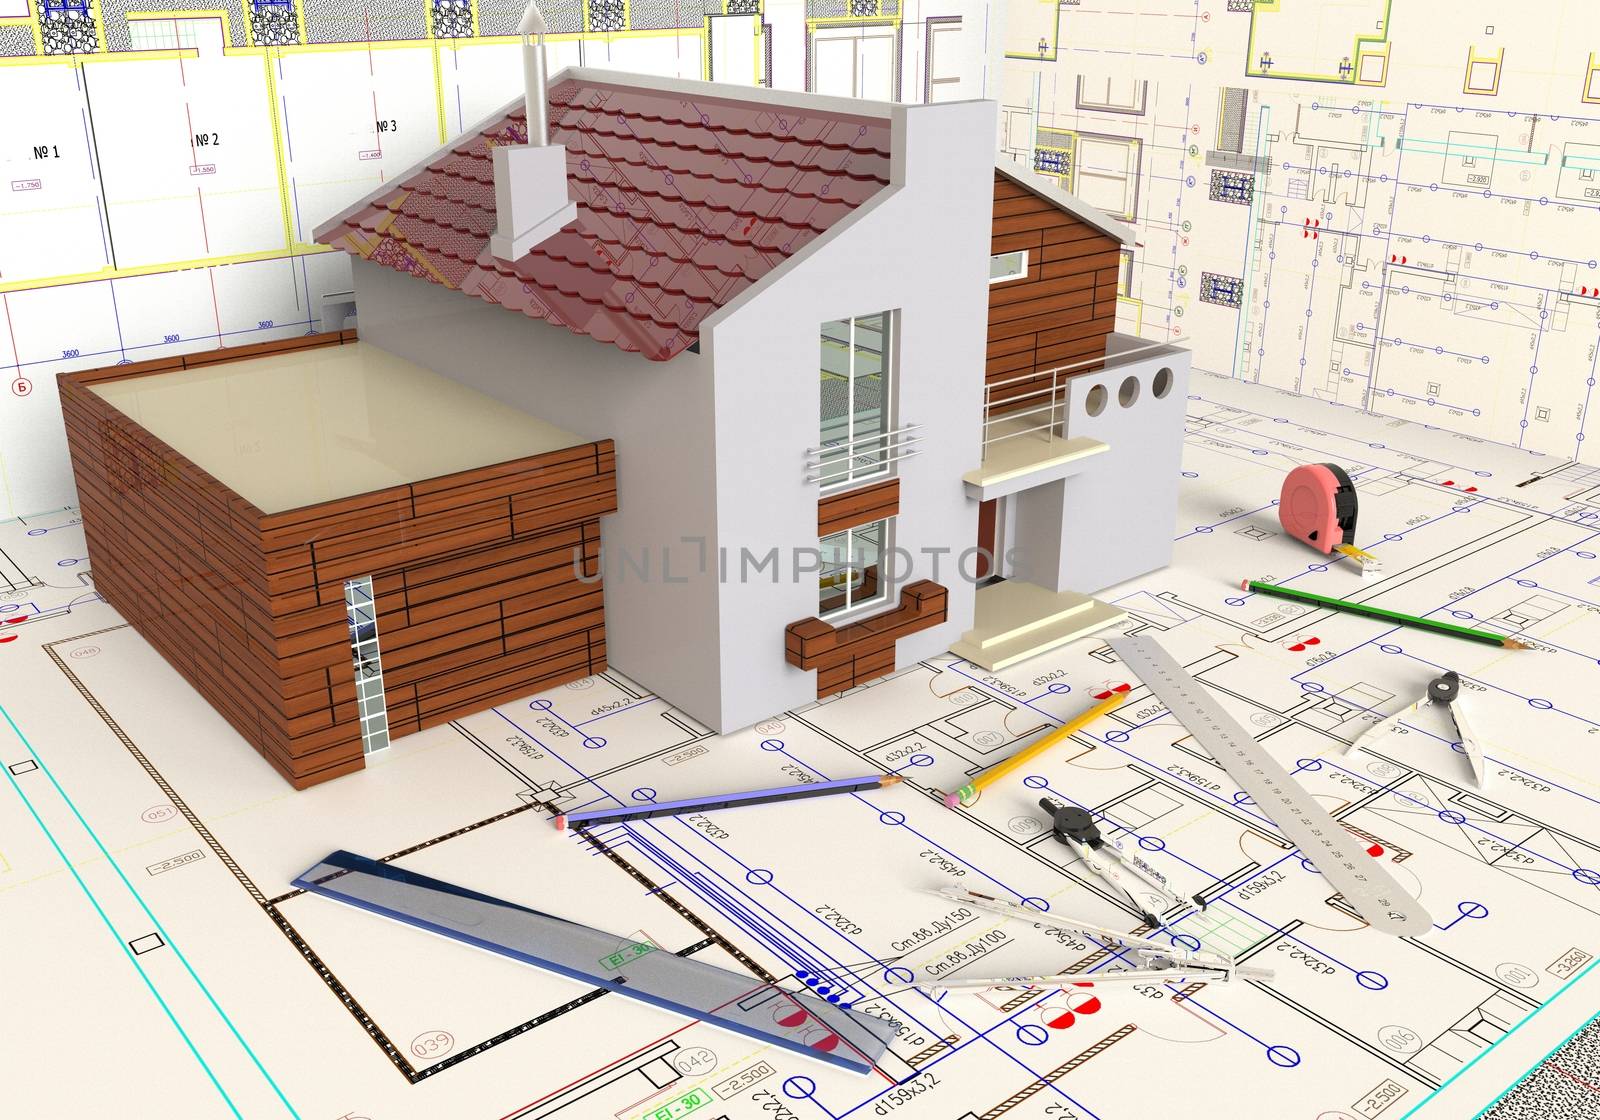 House Layout And Architectural Drawings by vik173